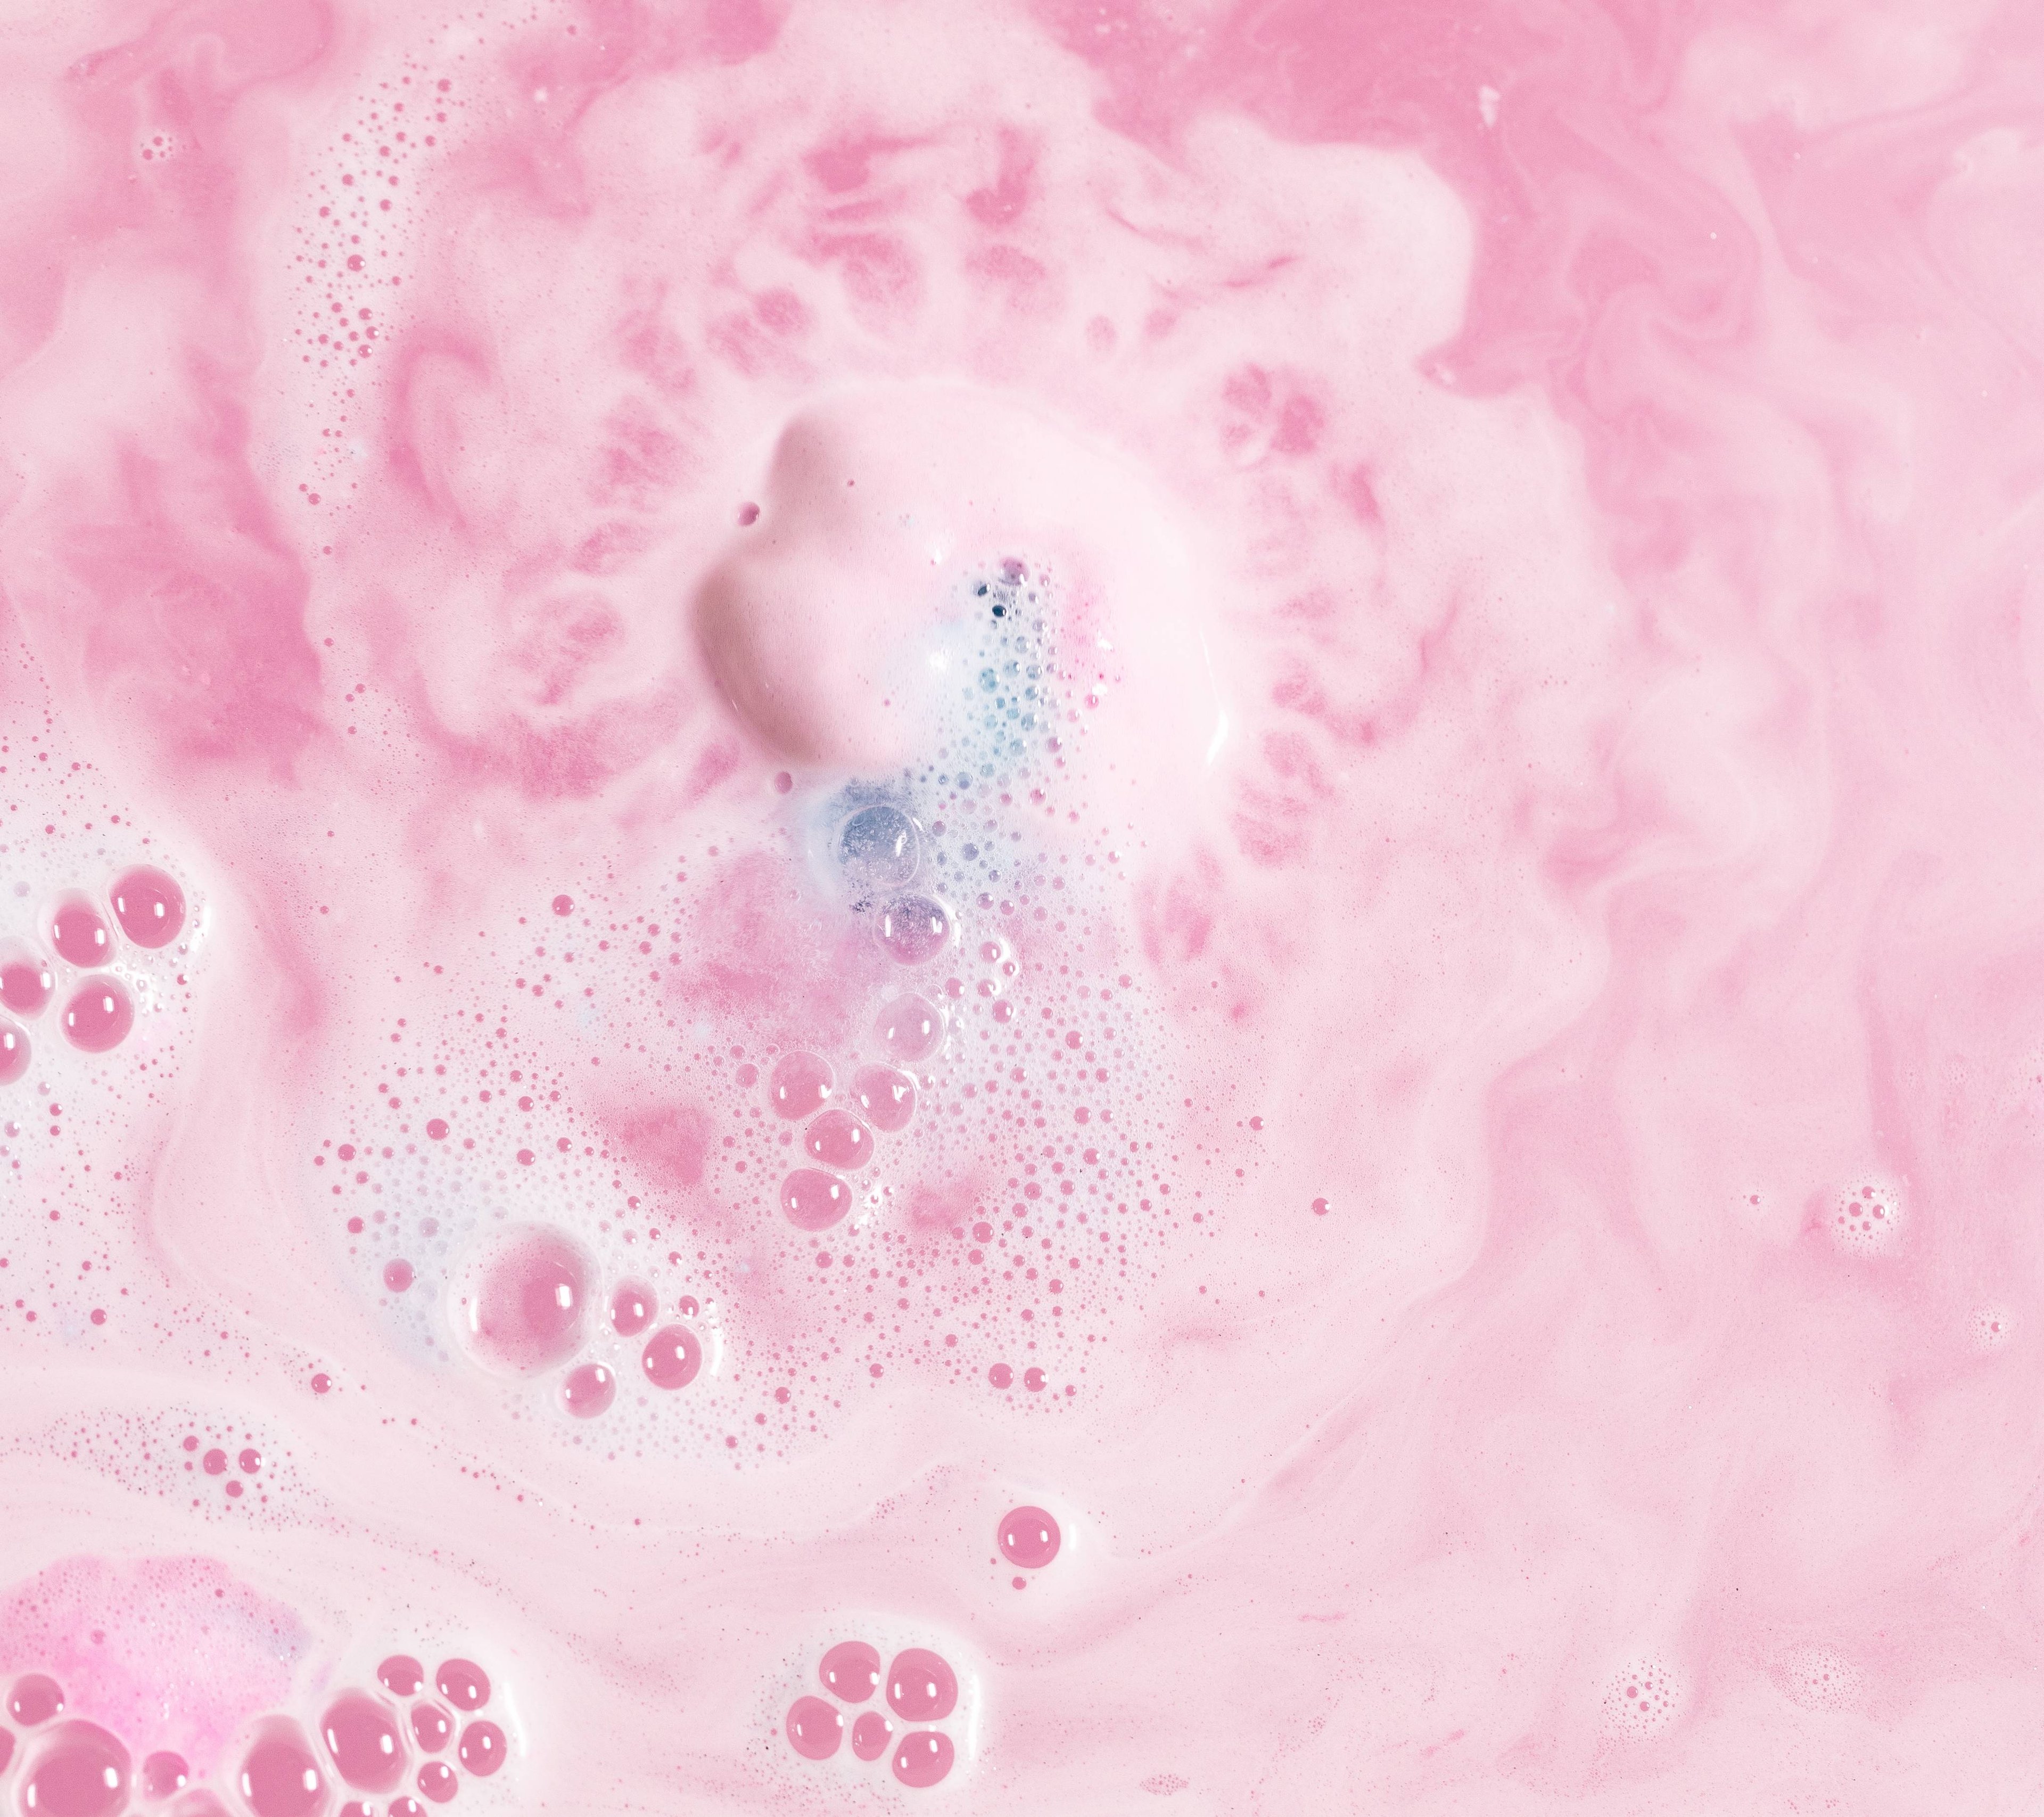 The Twilight bath bomb is slowly dissolving in the bath water creating thick swirls of delicate pink, bubbly foam with a flash of blue. 